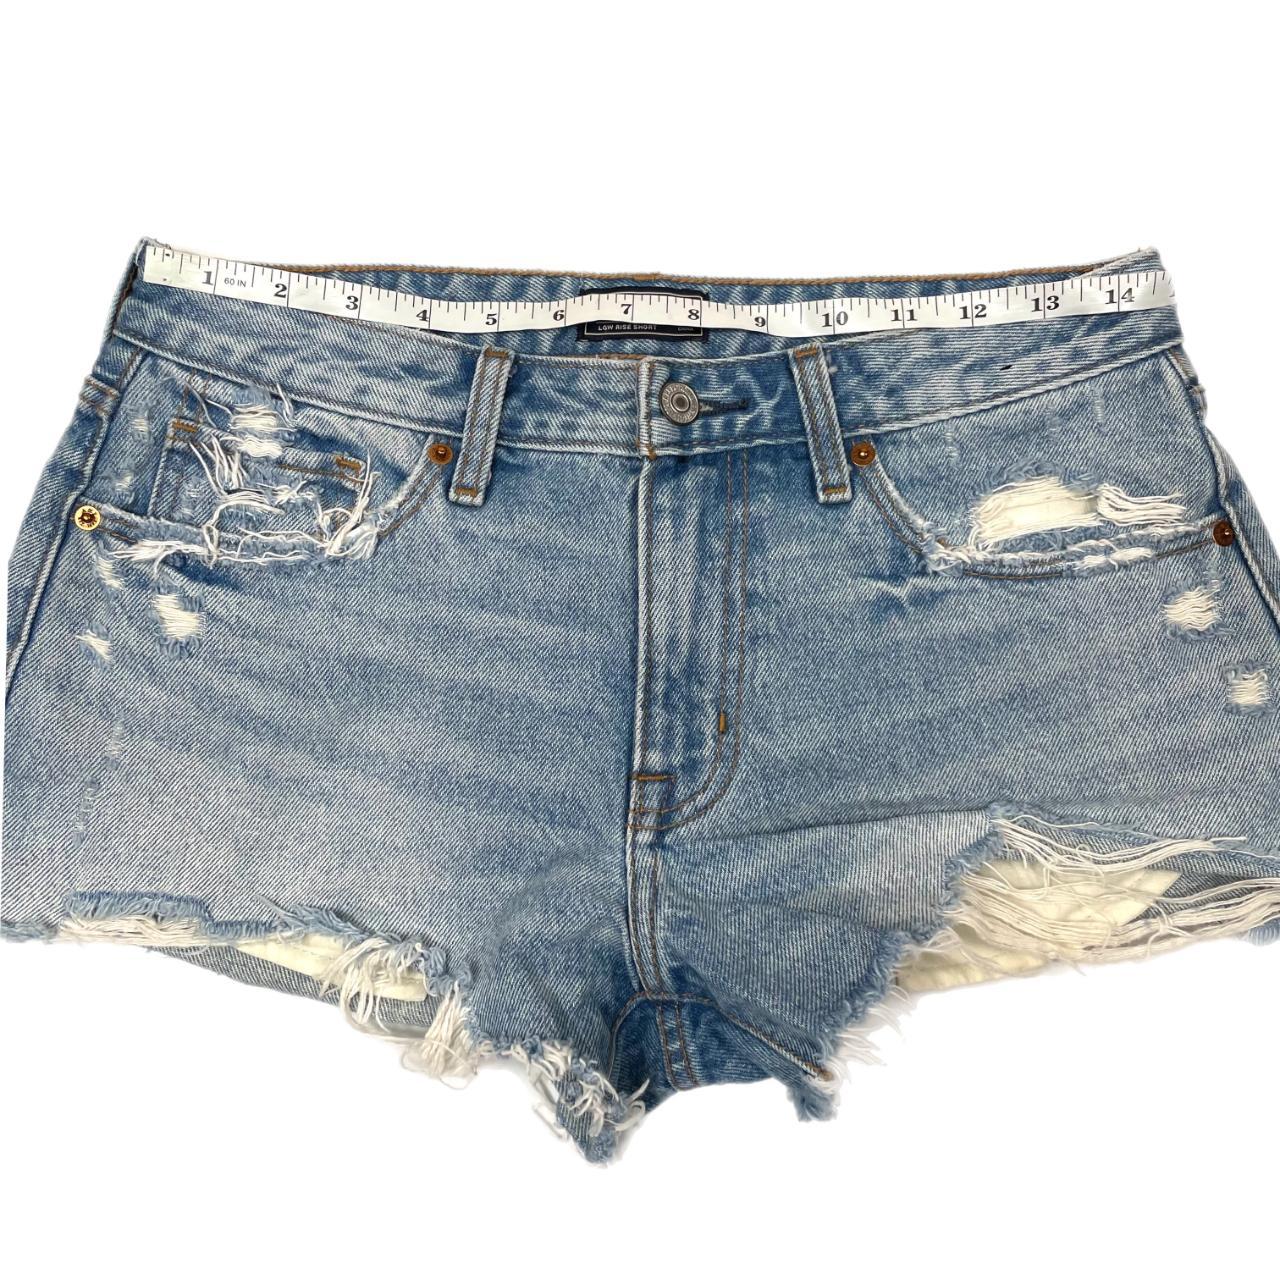 Vintage Abercrombie & Fitch low rise distressed - Depop